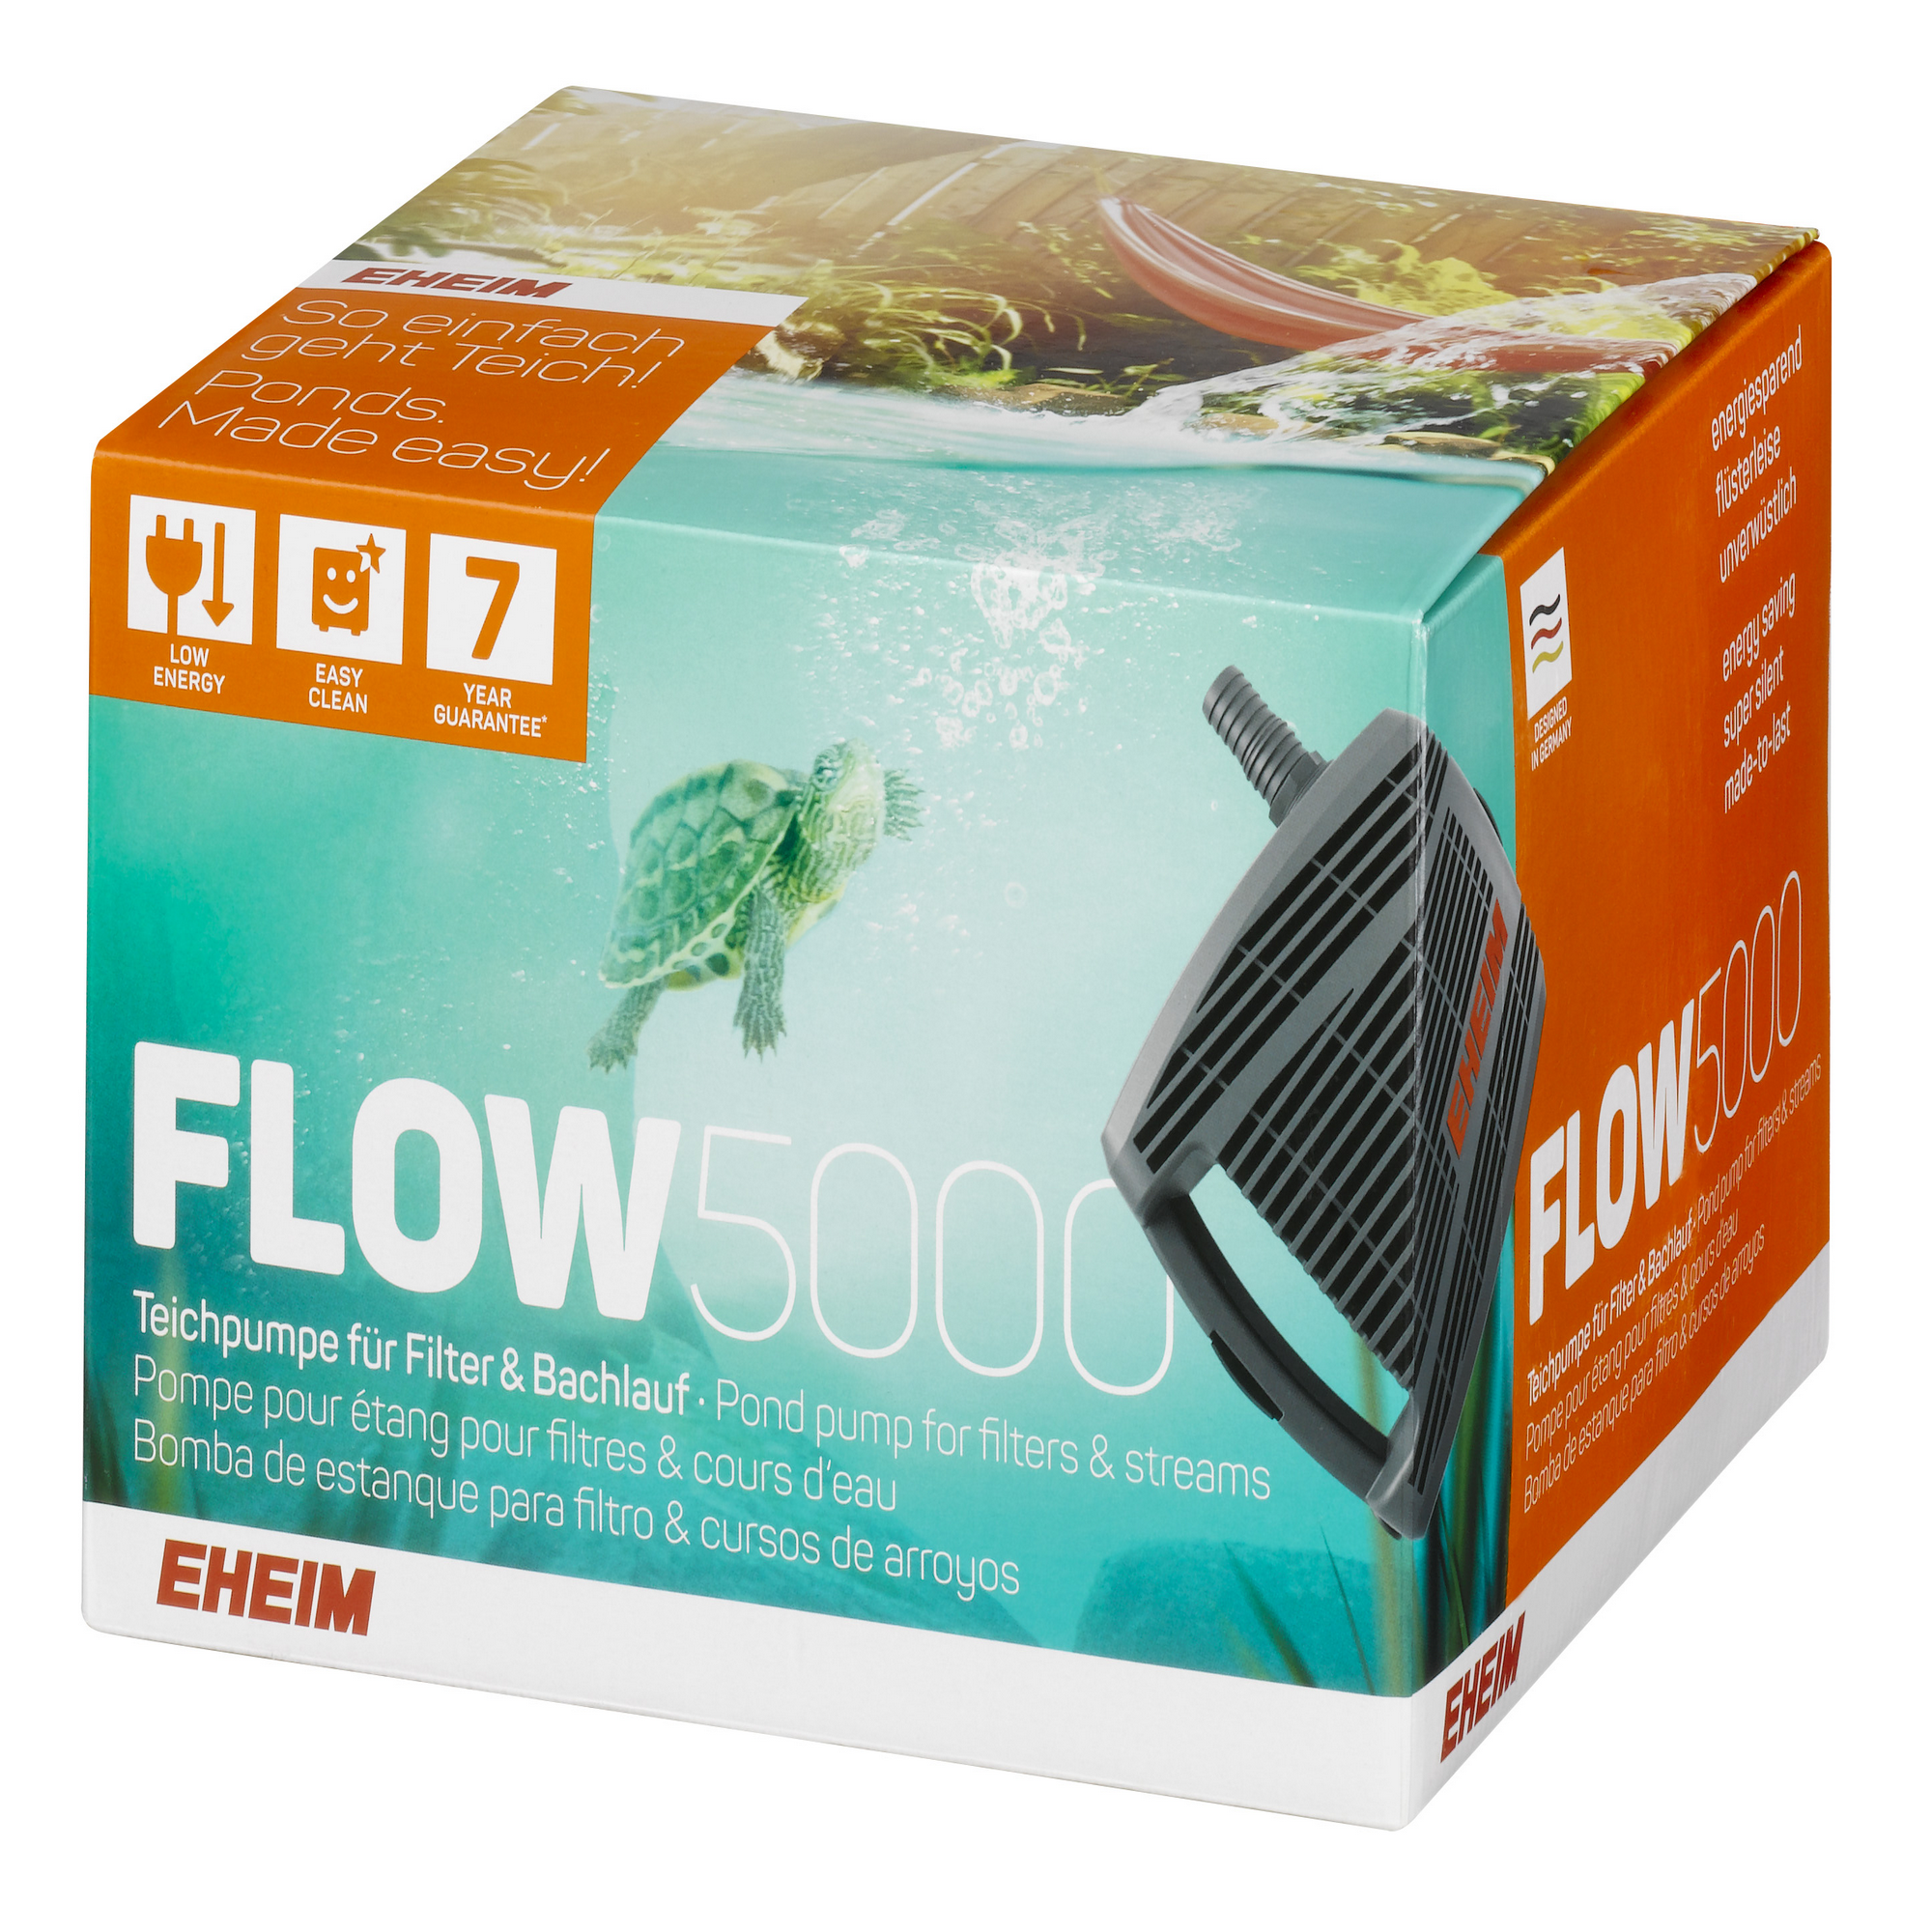 FLOW 5000 Teichpumpe + product picture